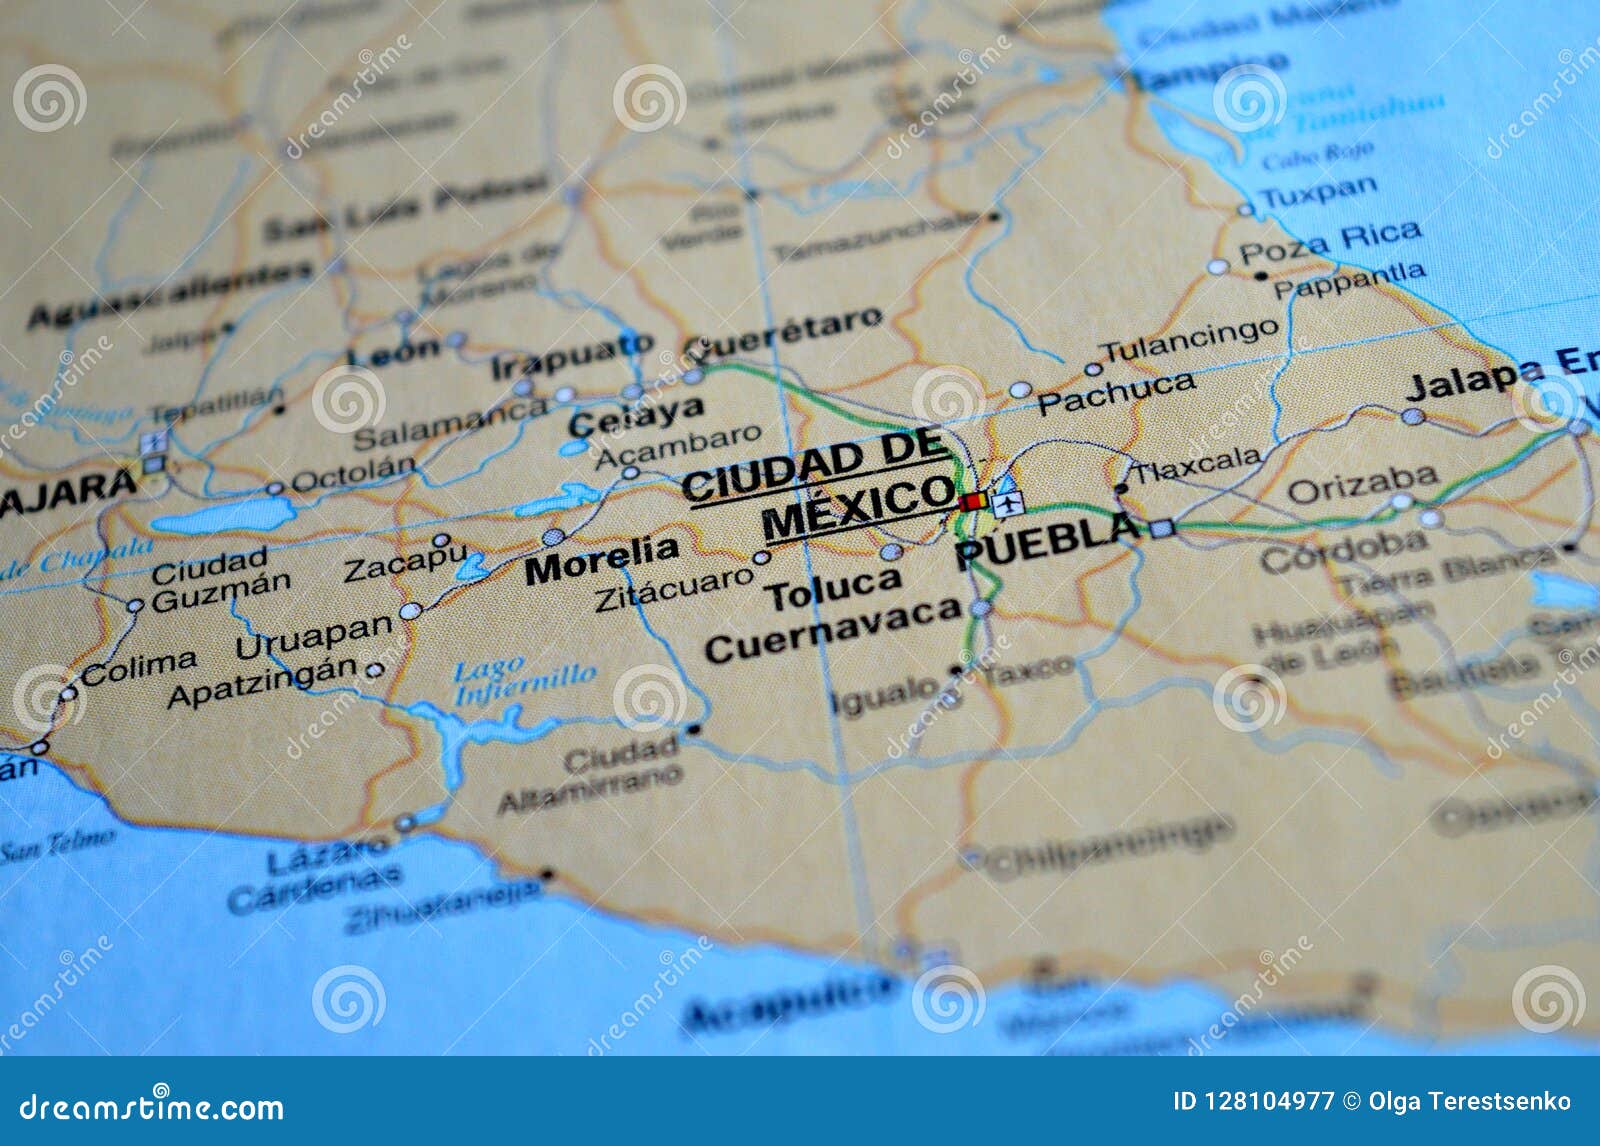 A Photo Of Ciudad De Mexico On A Map Stock Image Image Of Roads